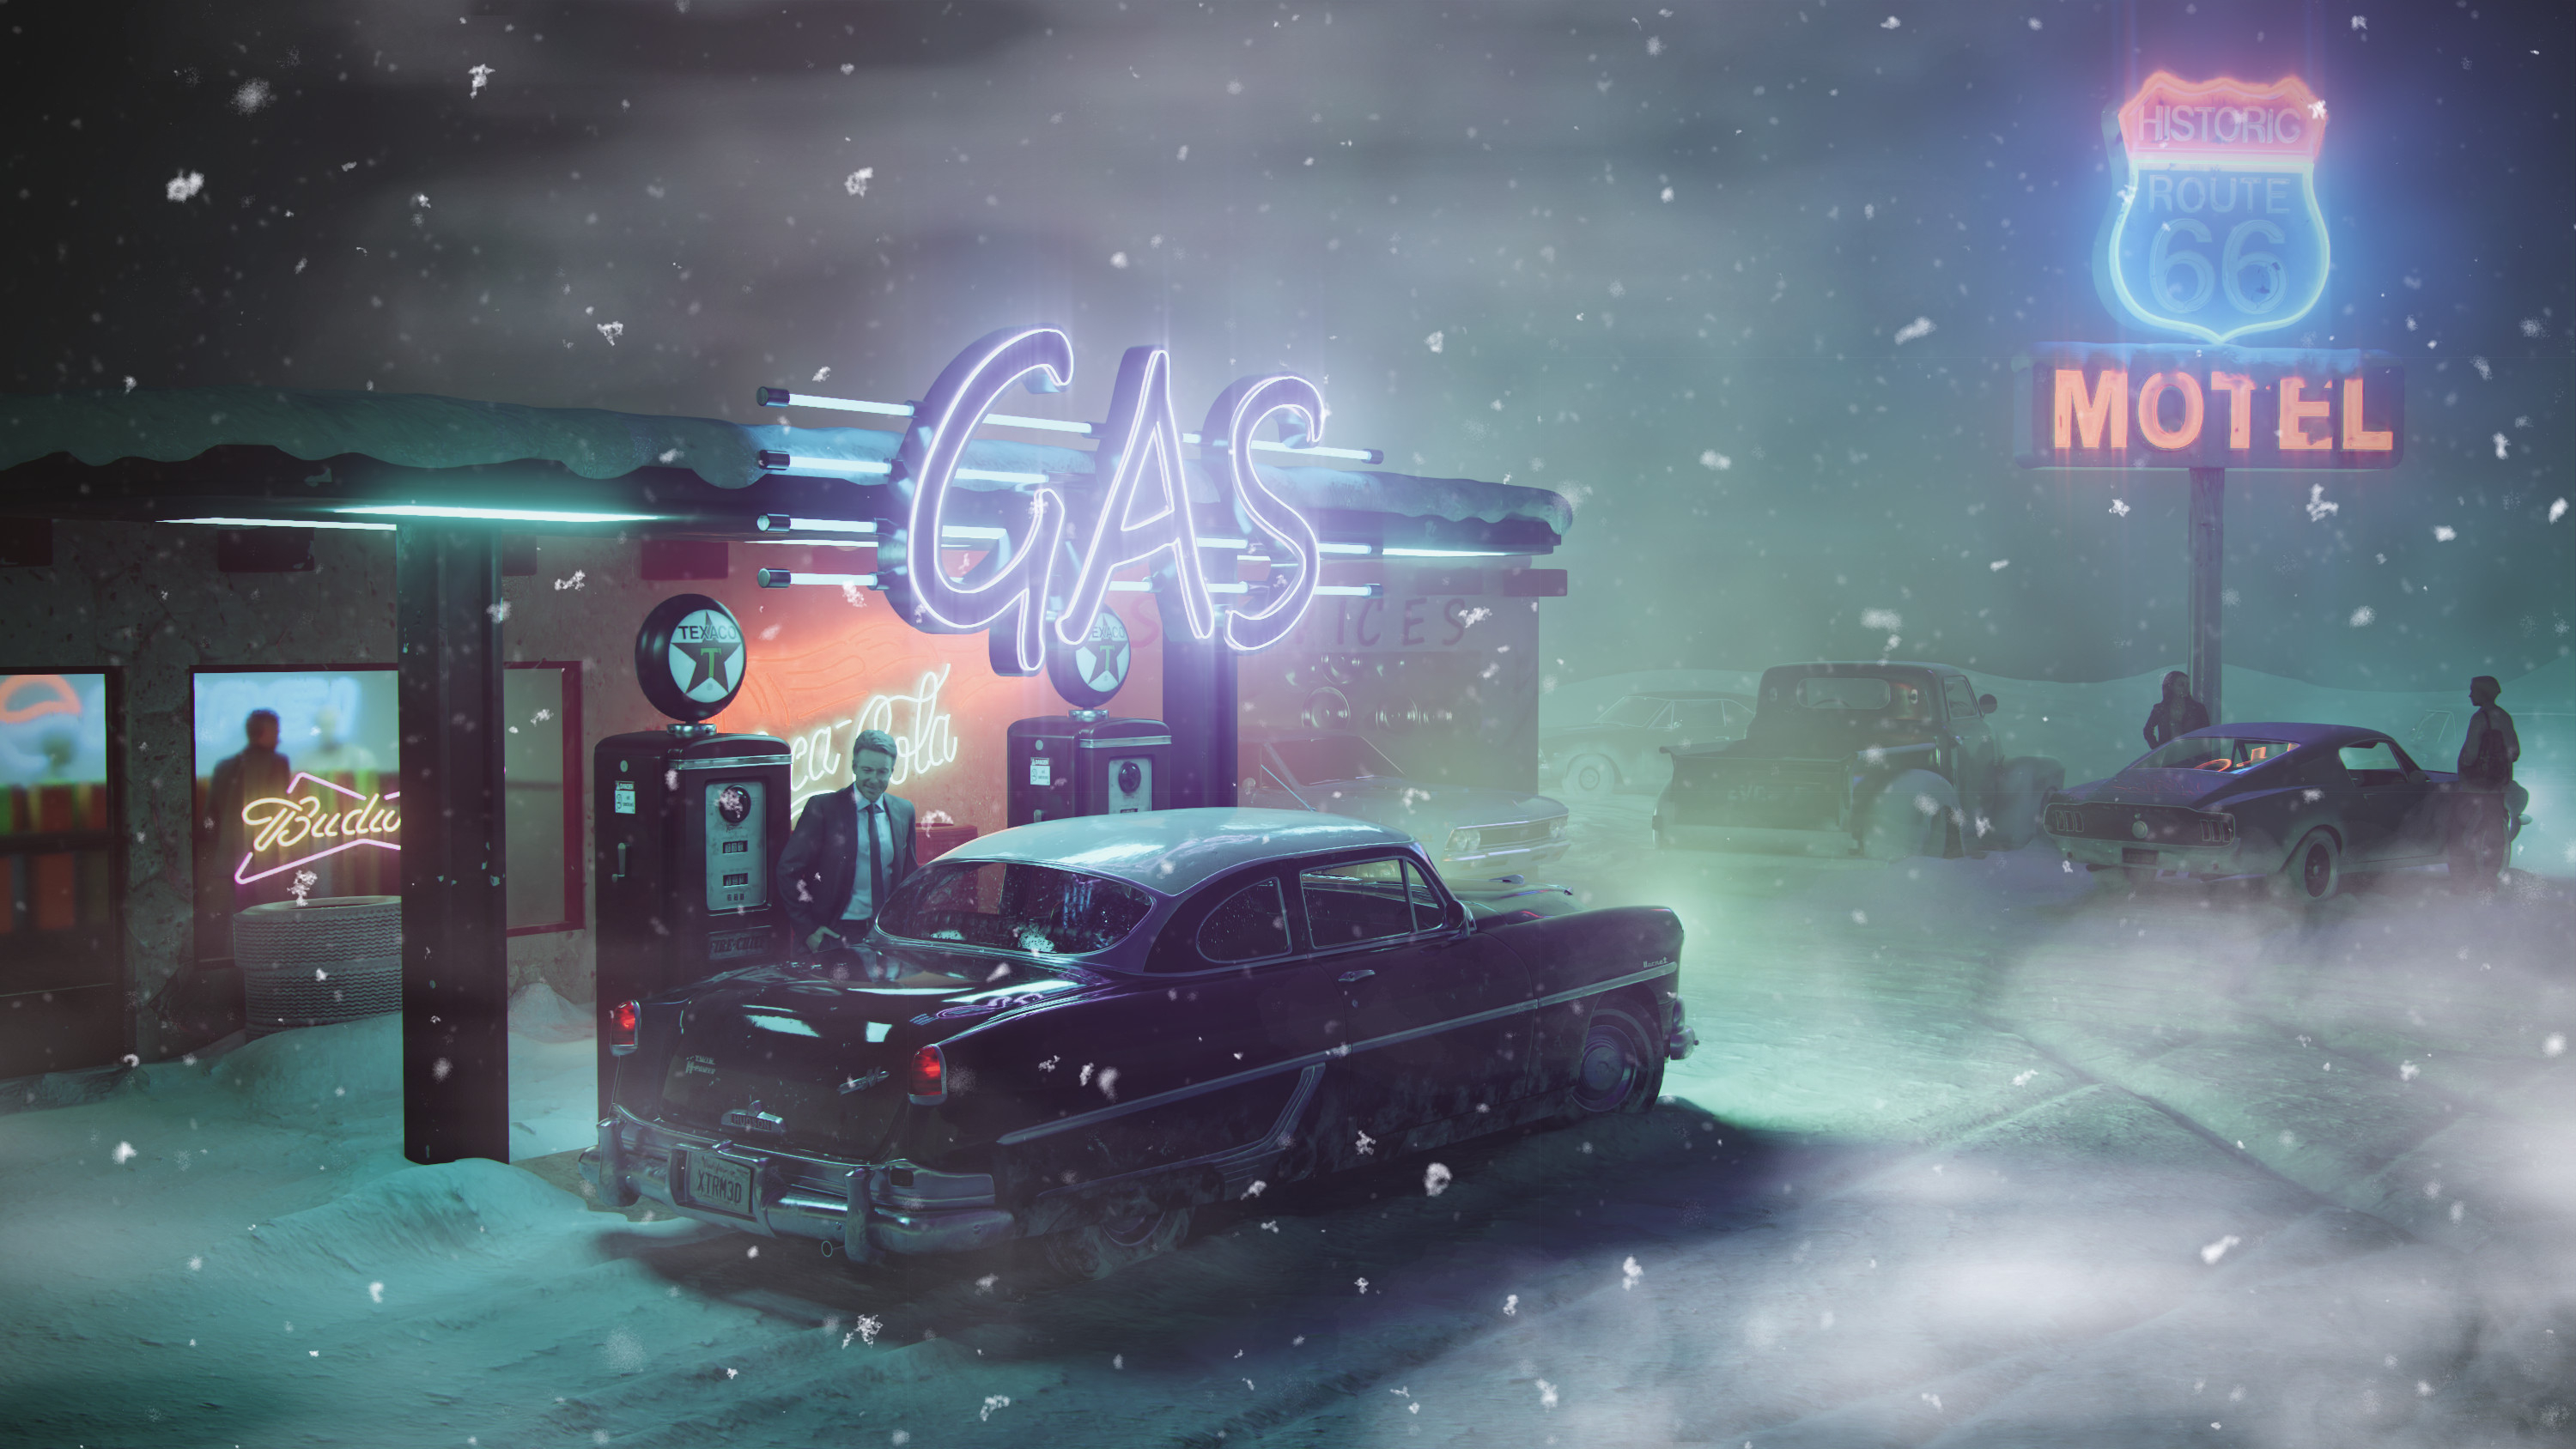 3000x1688 Wallpaper : winter, night, cold, men, car, artwork, vehicle, Gas station, motel, Route 66, snow flakes WallpaperManiac 1975117 HD Wallpapers